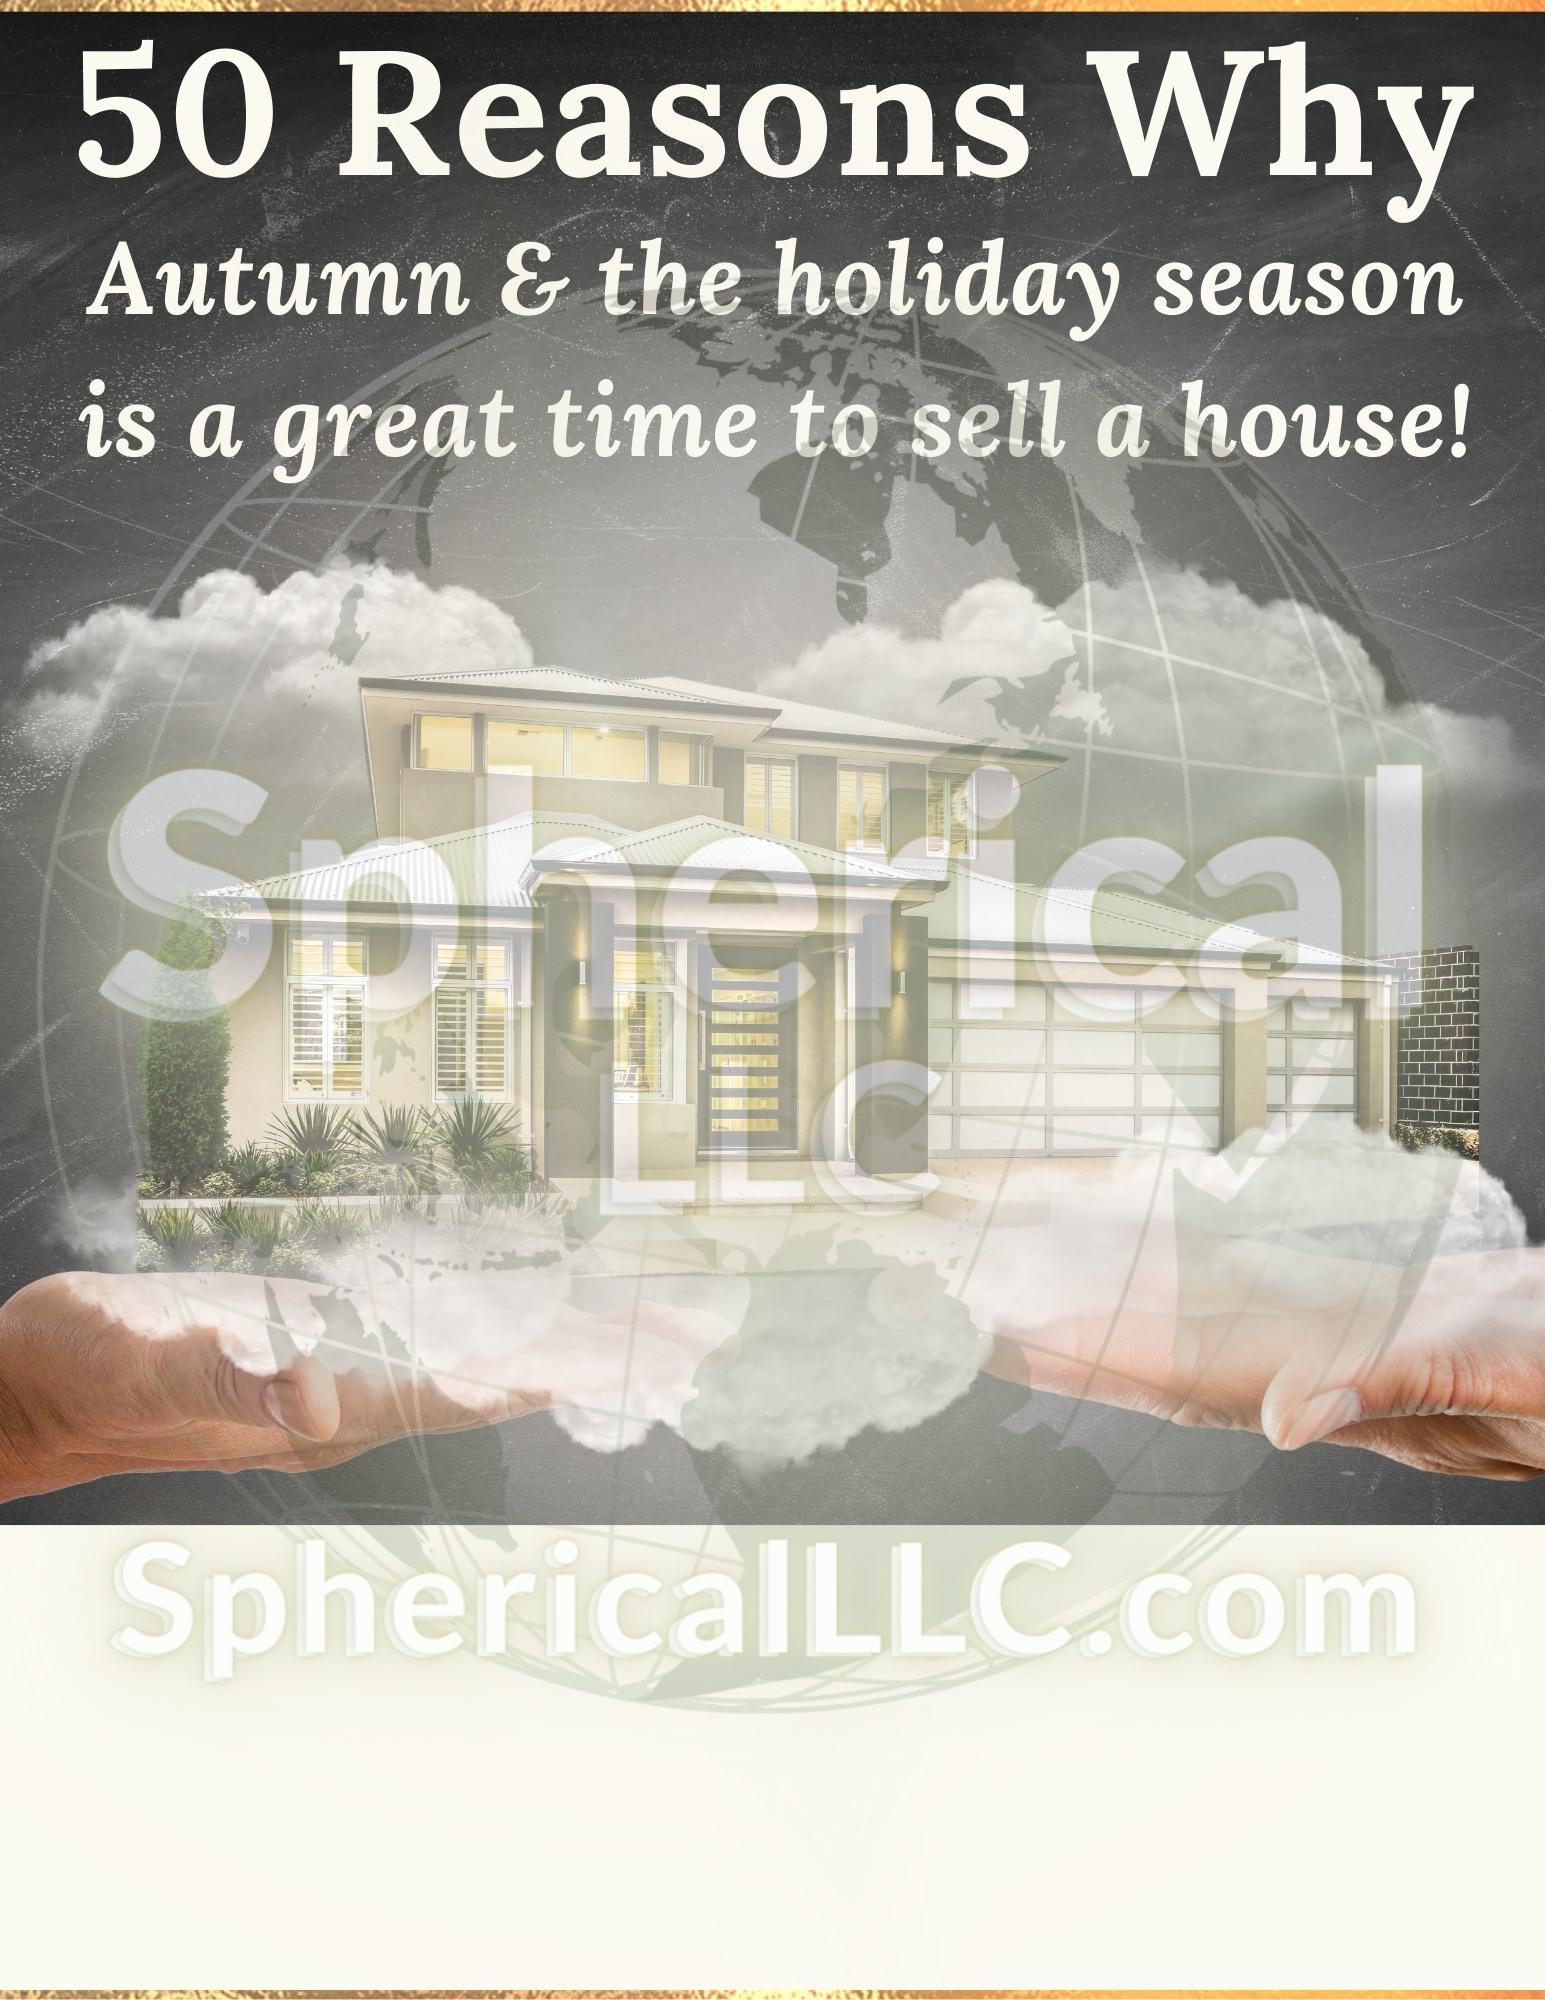 1 listing campaign, 50 reasons to sell in autumn & the holiday season,  brochure & flyers, visit SphericalLLC.com for more!